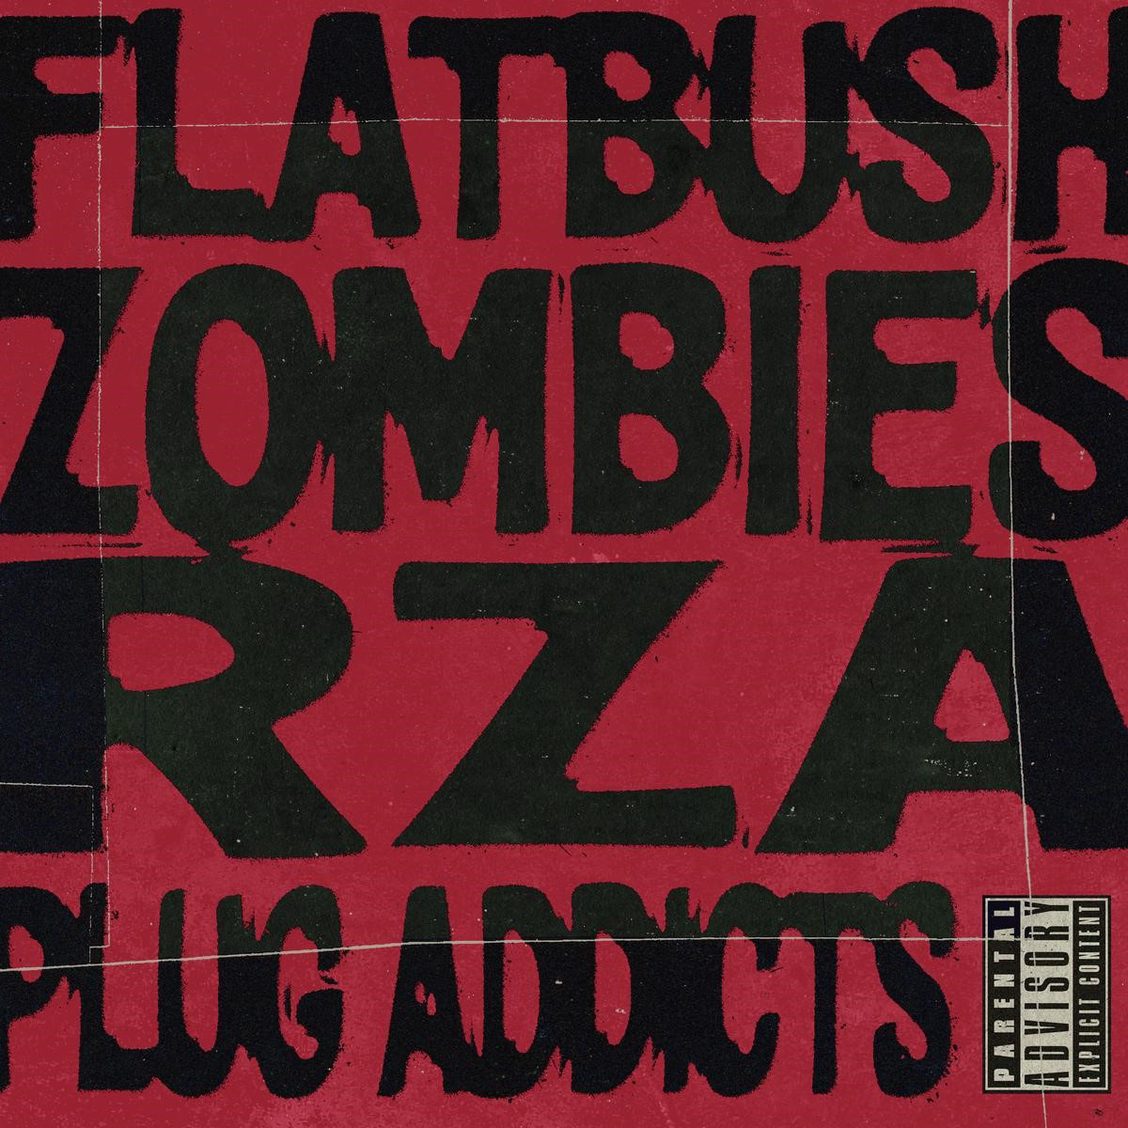 RZA & Flatbush Zombies Plug Addicts Cover by 36 Chambers, Flatbush Zombies, RZA, and MNRK Music Group for use by 360 Magazine